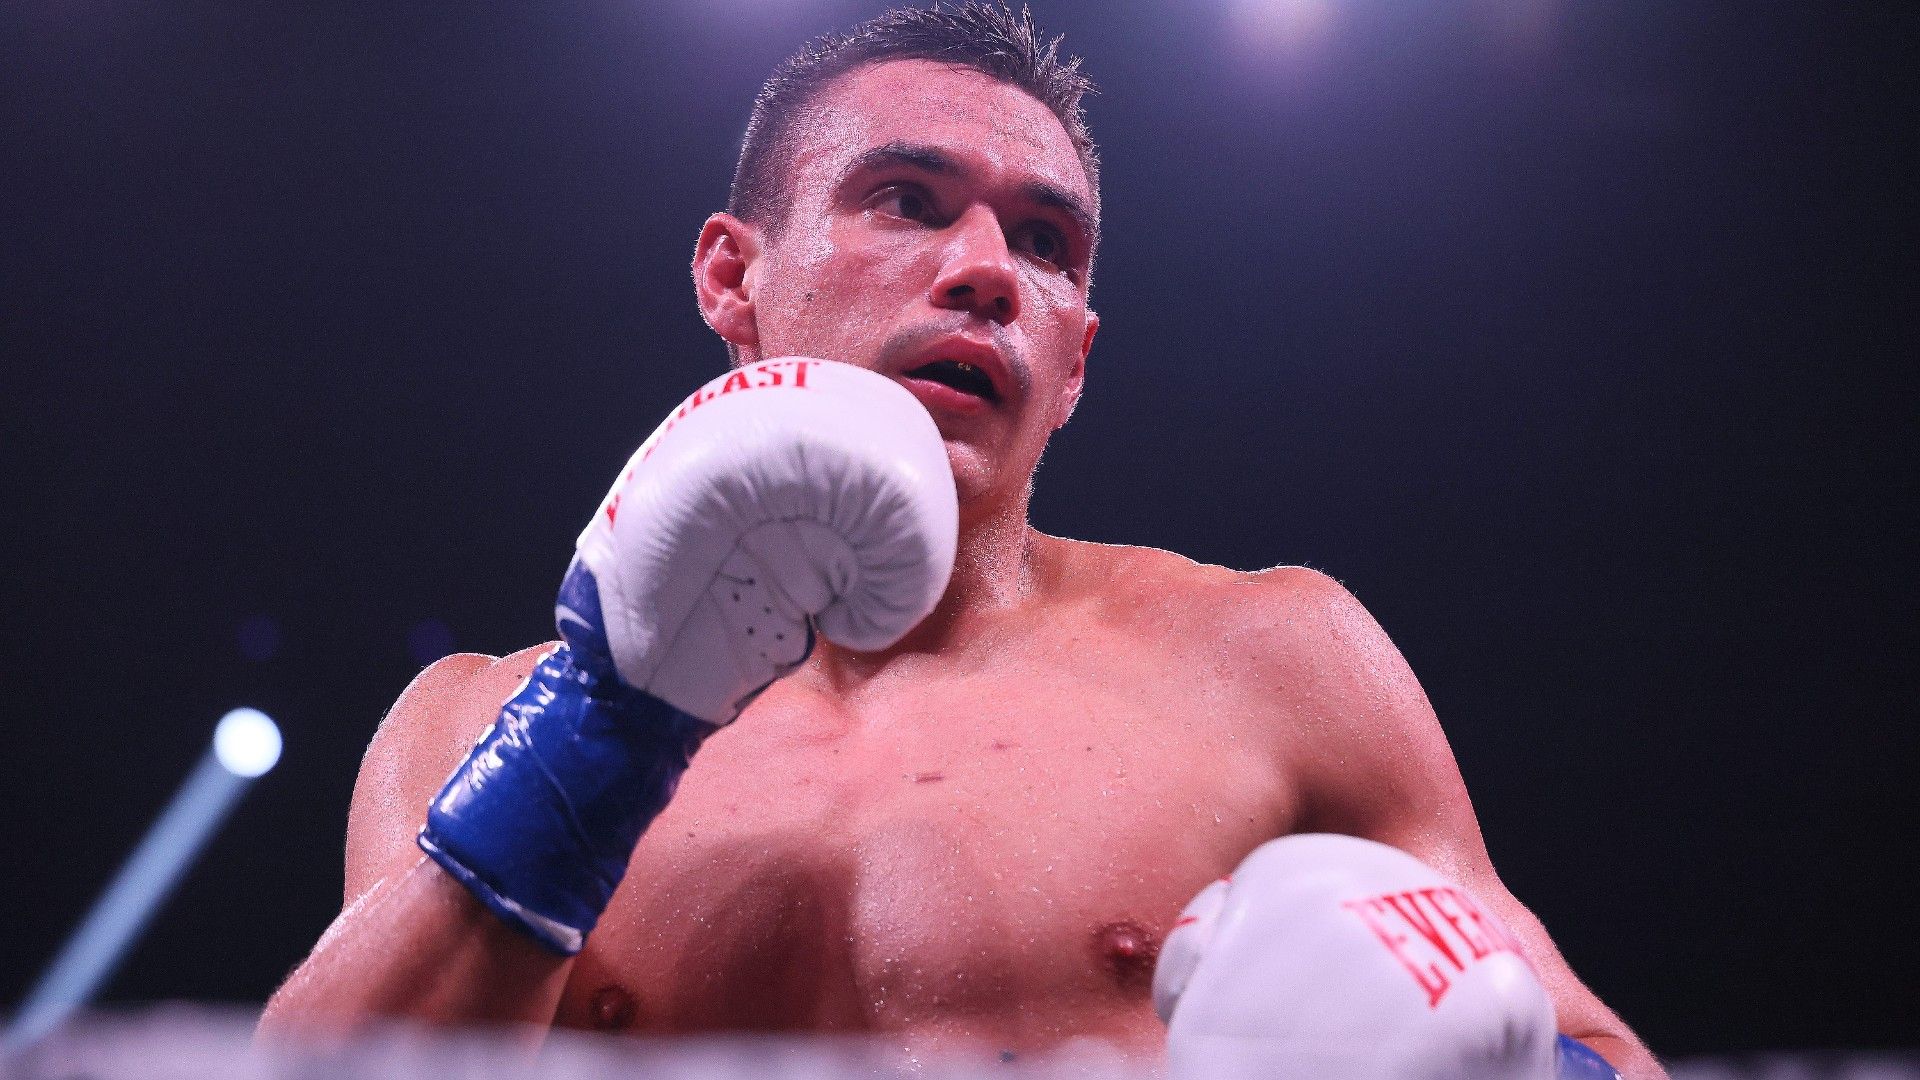 EXCLUSIVE: Tim Tszyu 'done' fighting in Australia, eyeing Las Vegas for world title fight